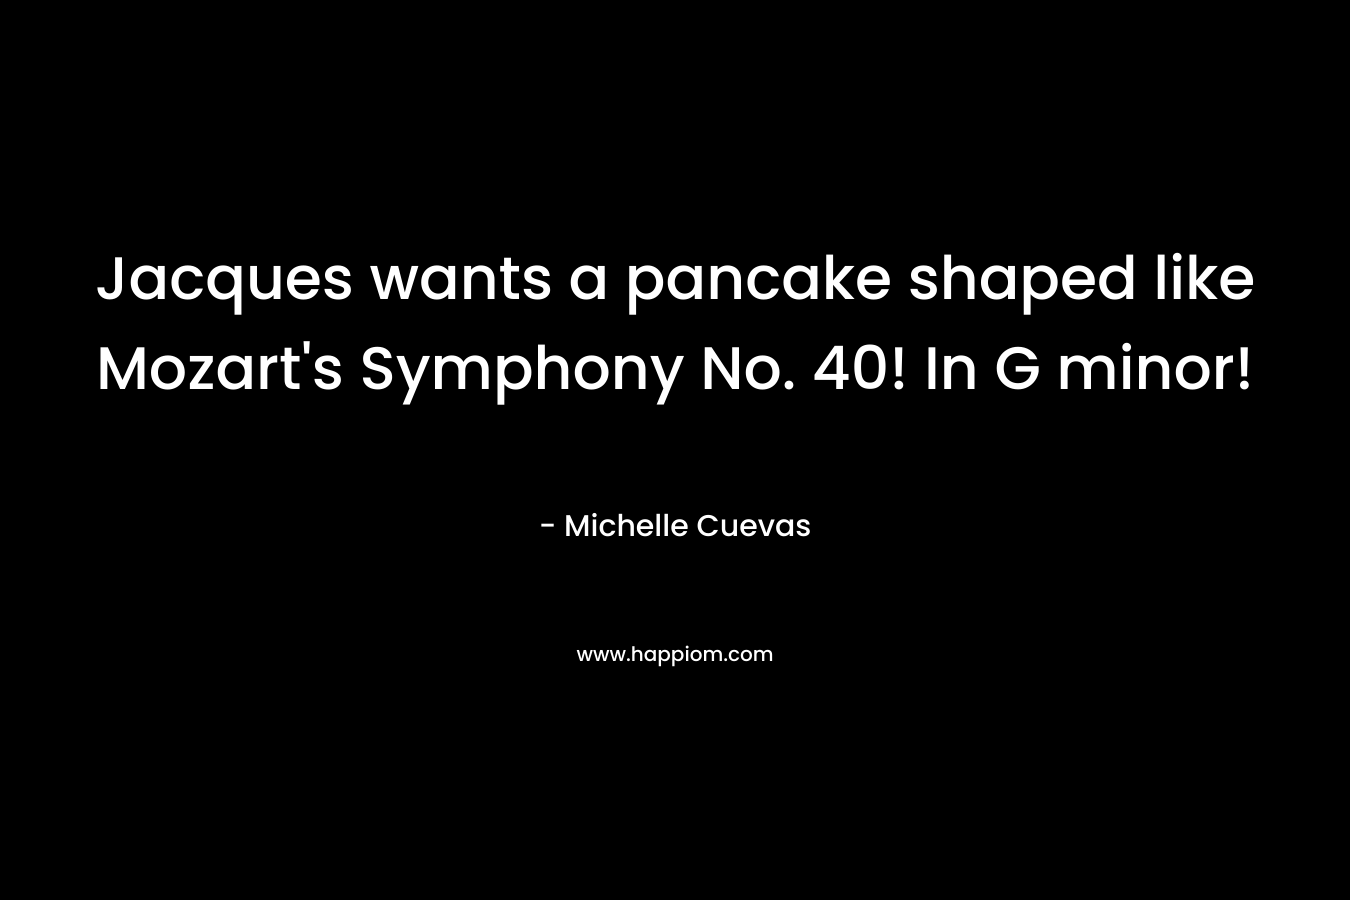 Jacques wants a pancake shaped like Mozart’s Symphony No. 40! In G minor! – Michelle Cuevas